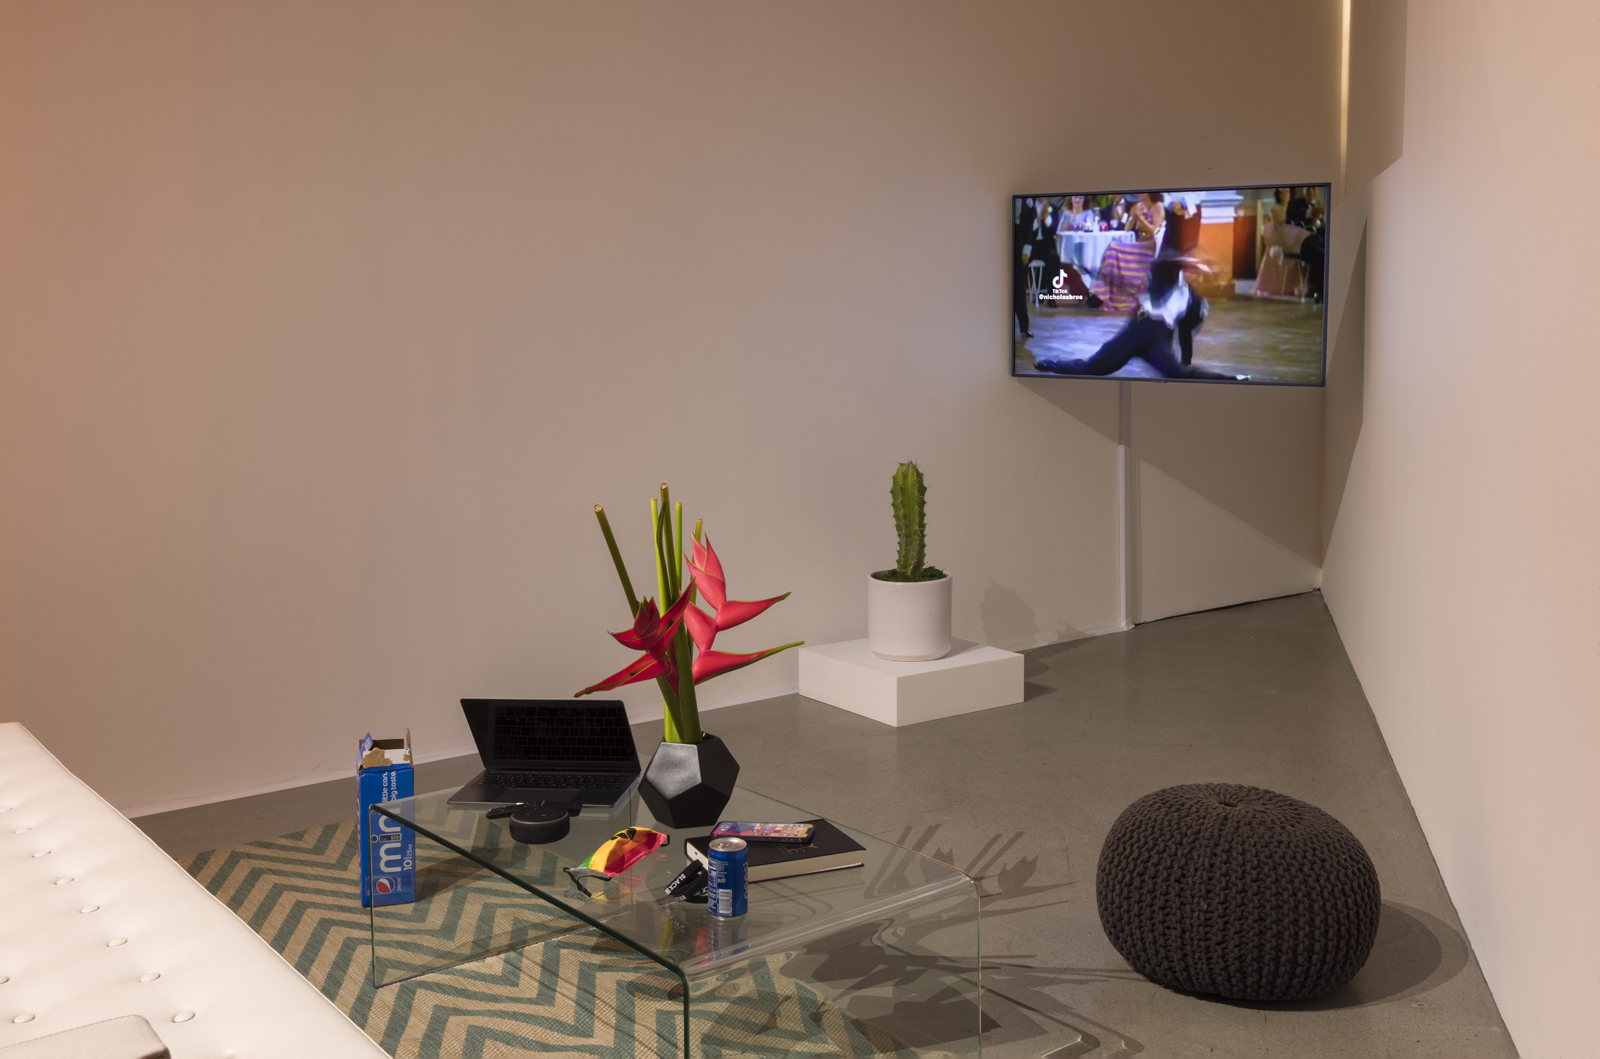 installation space of blitz bazawule at uta artist space of couch and glass table with objects and television